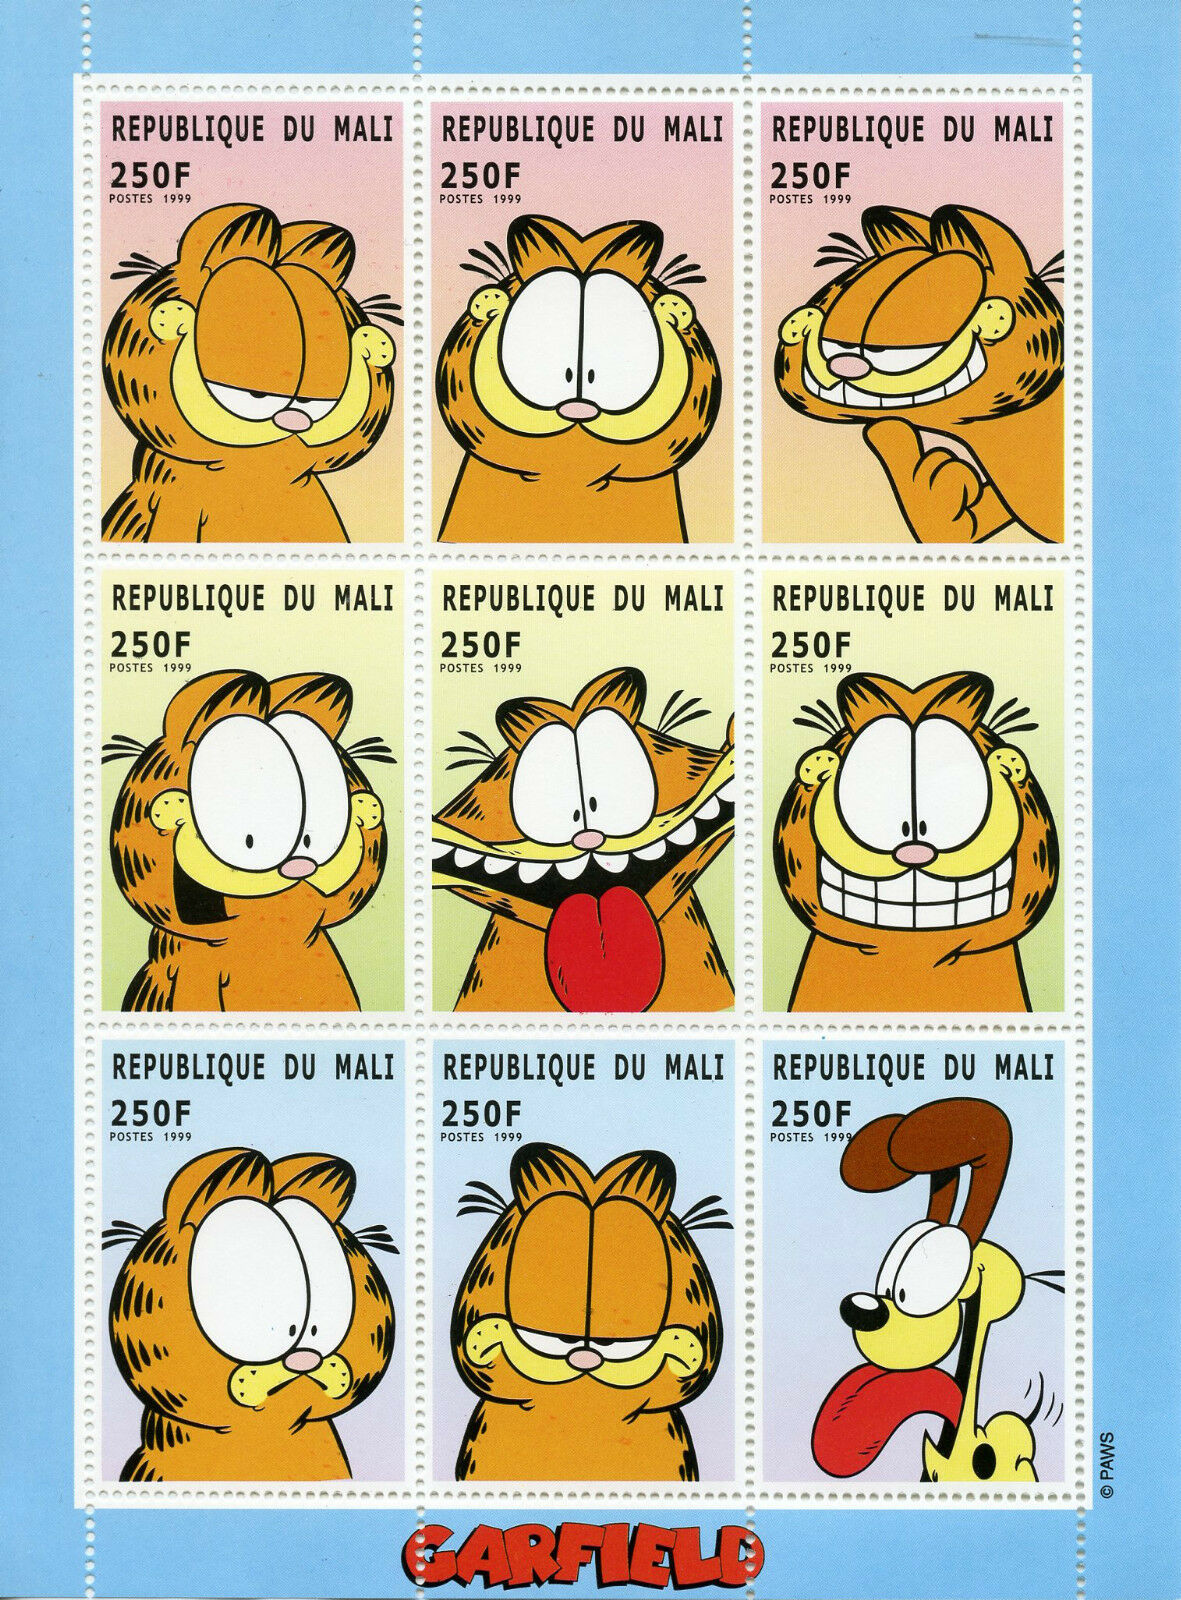 Mali 1999 MNH Cartoons Stamps Garfield Cats Odie Dogs Comics 9v M/S